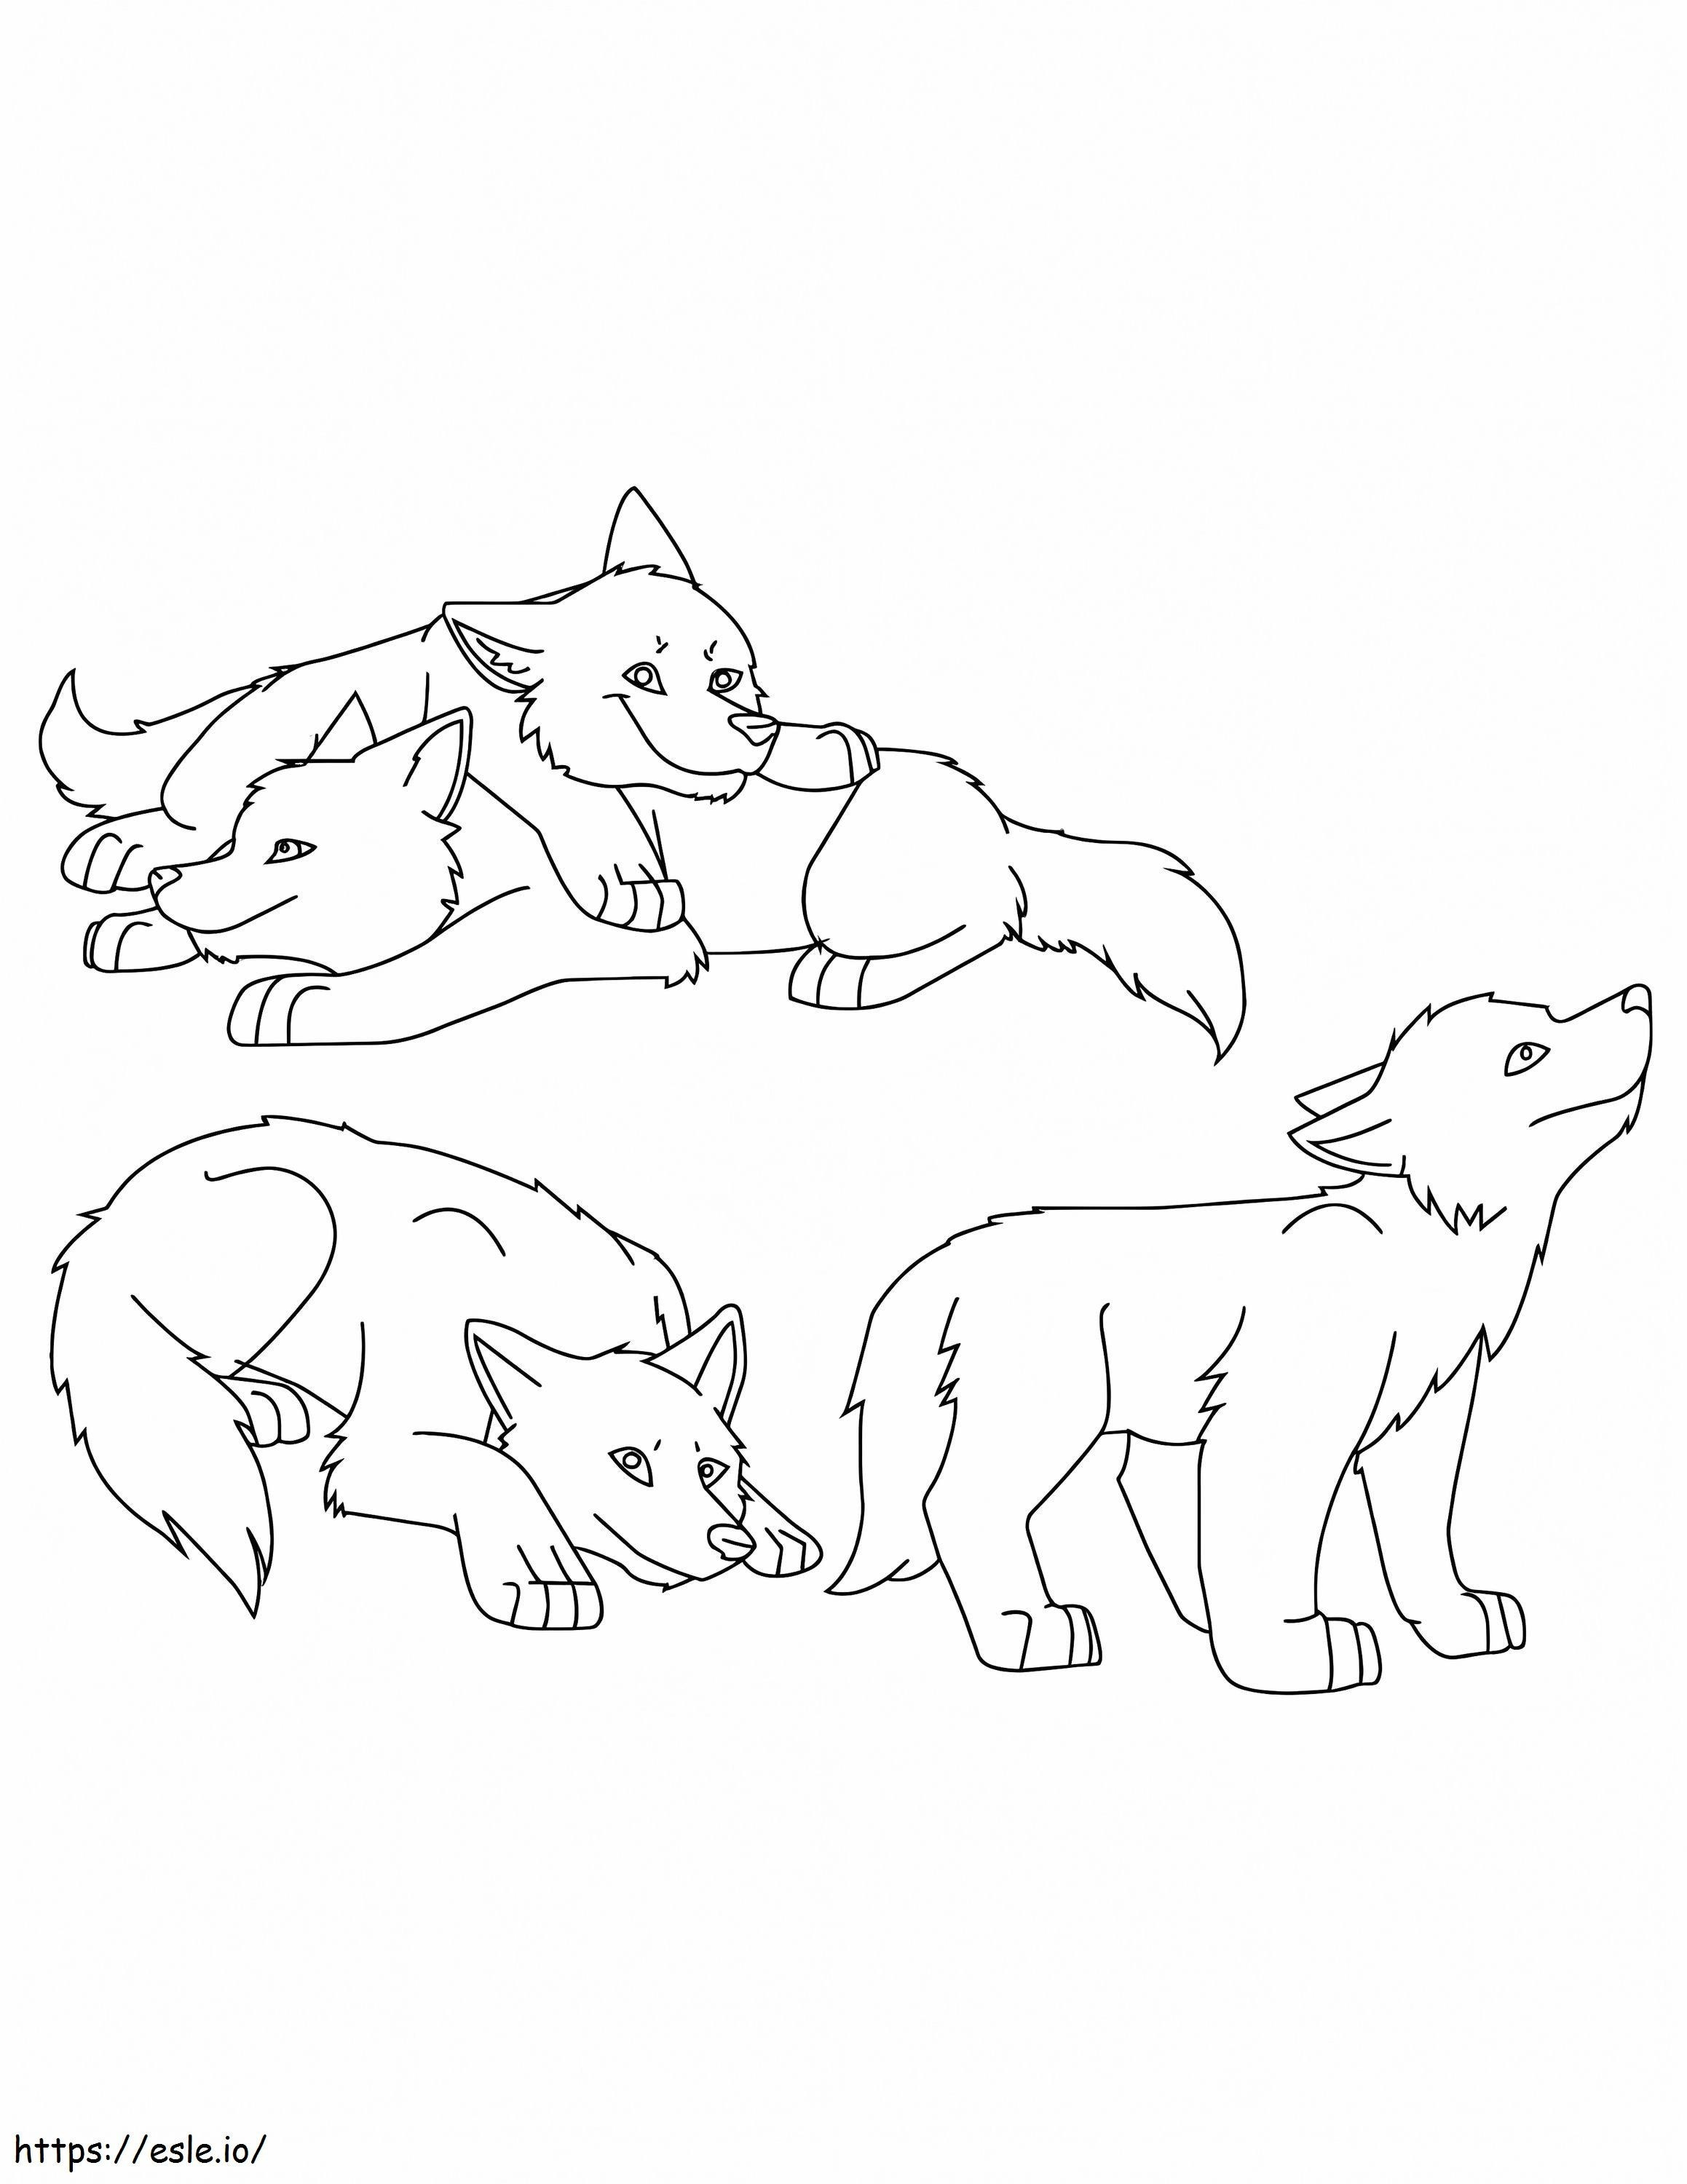 Four Little Wolf coloring page